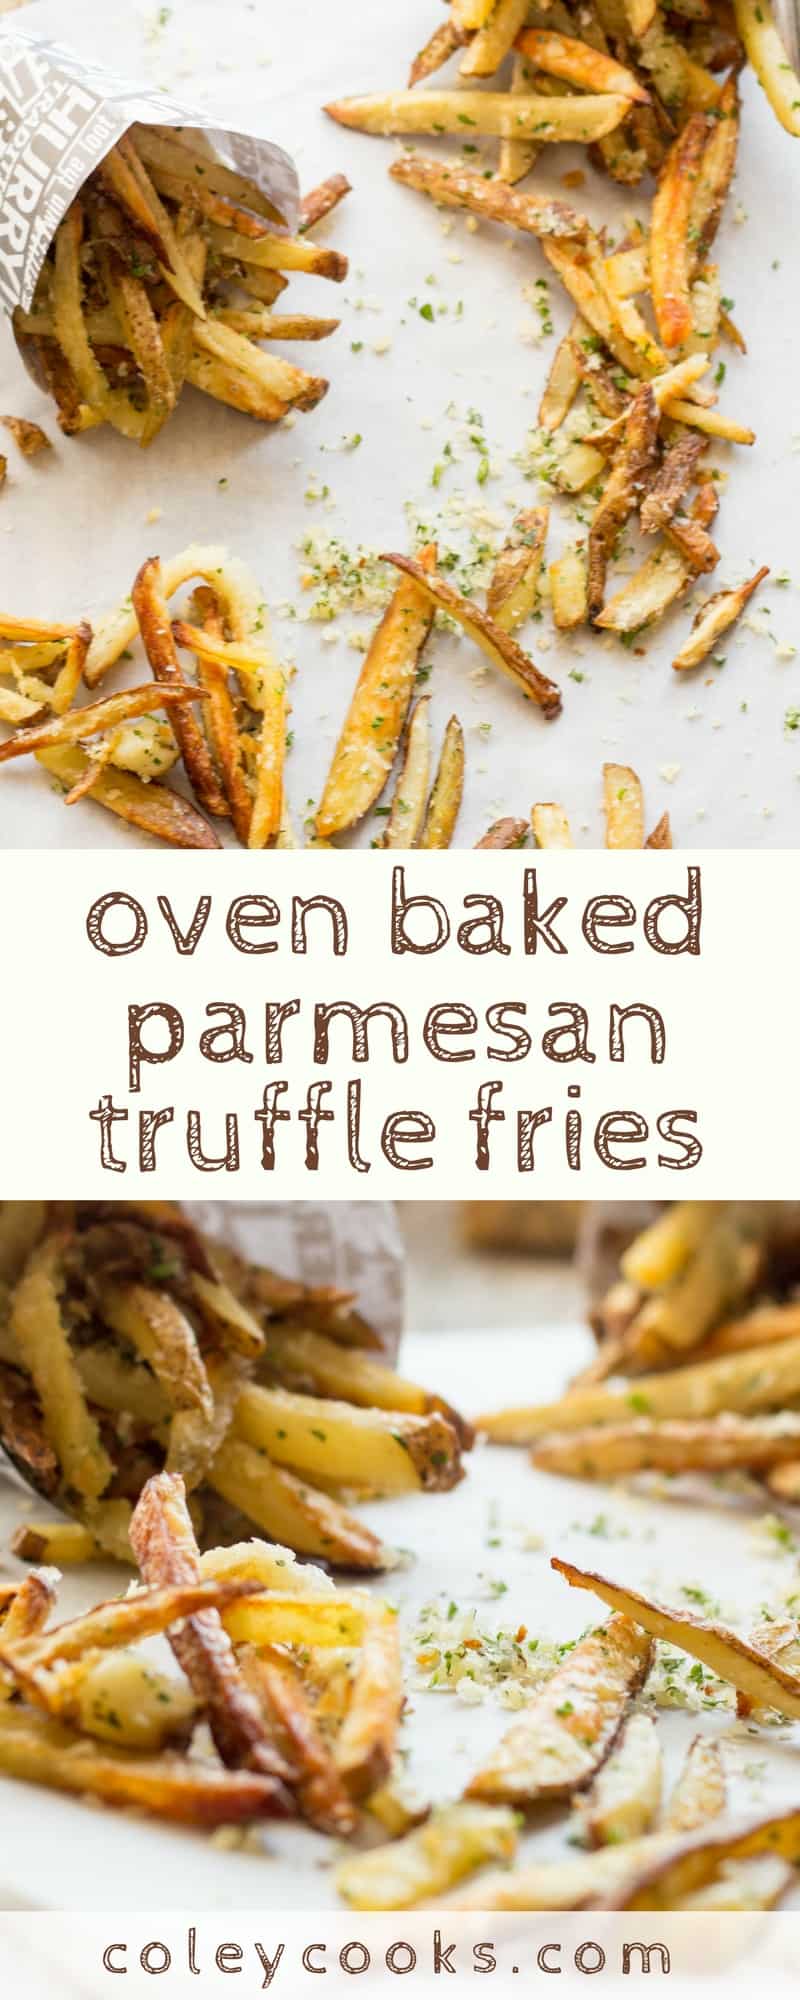 OVEN BAKED PARMESAN TRUFFLE FRIES | Tricks to getting the crispiest oven baked fries that get an extra boost of flavor from parmesan cheese and truffle oil. The best! | ColeyCooks.com